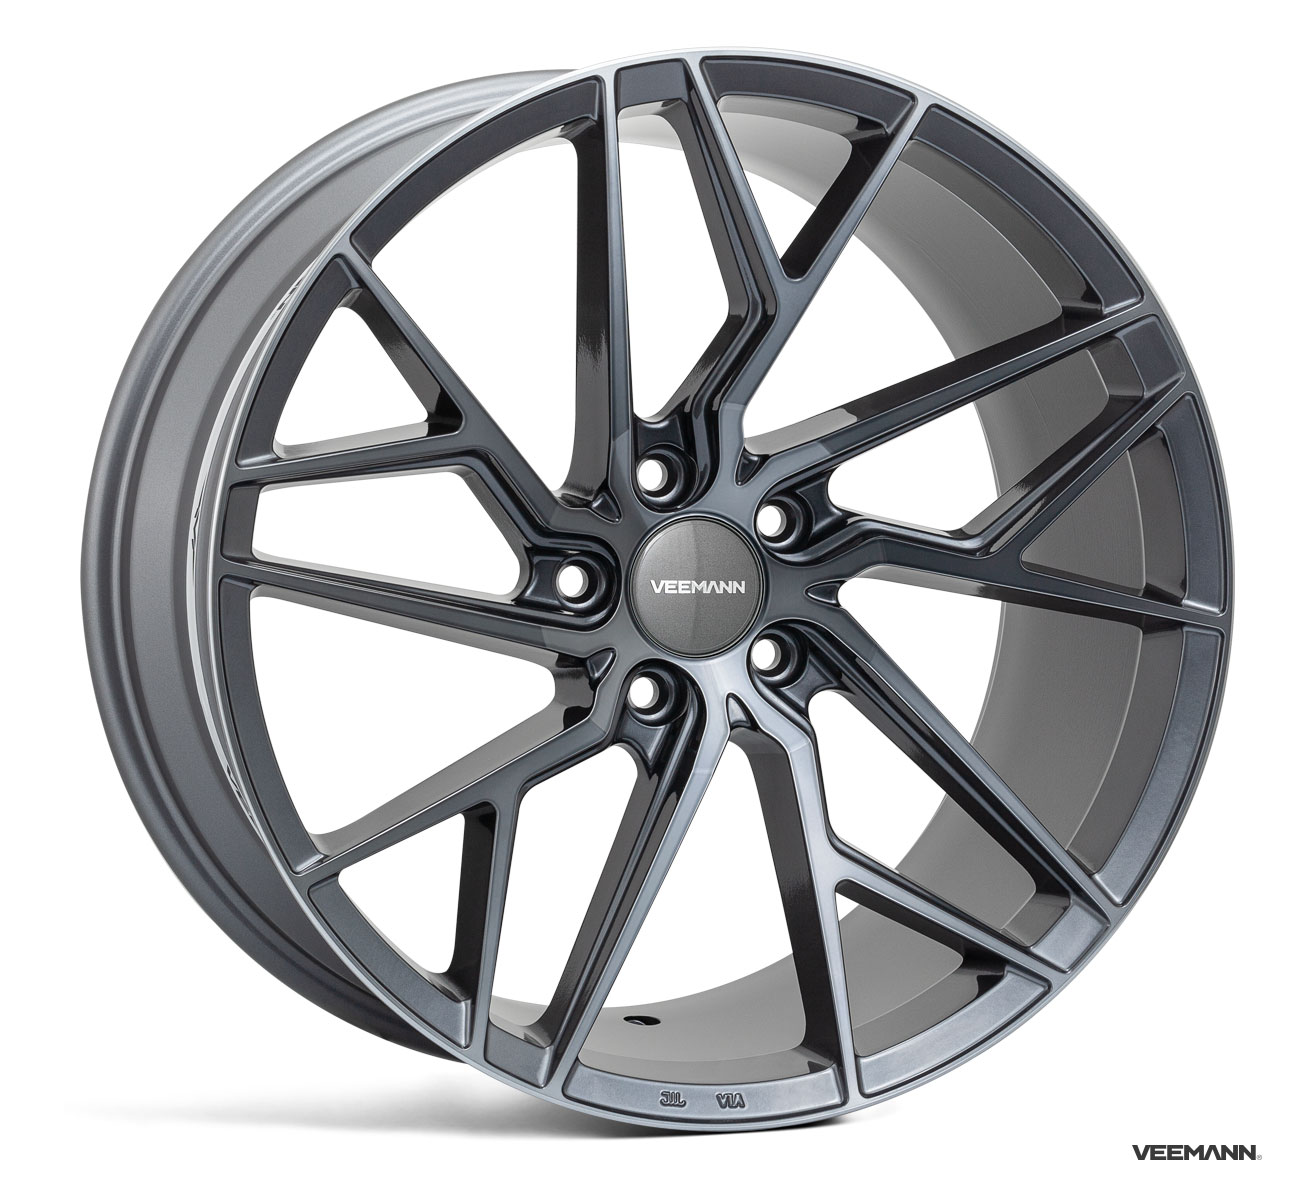 NEW 18" VEEMANN V-FS44 ALLOY WHEELS IN GRAPHITE SMOKE POL WITH WIDER 9" REARS